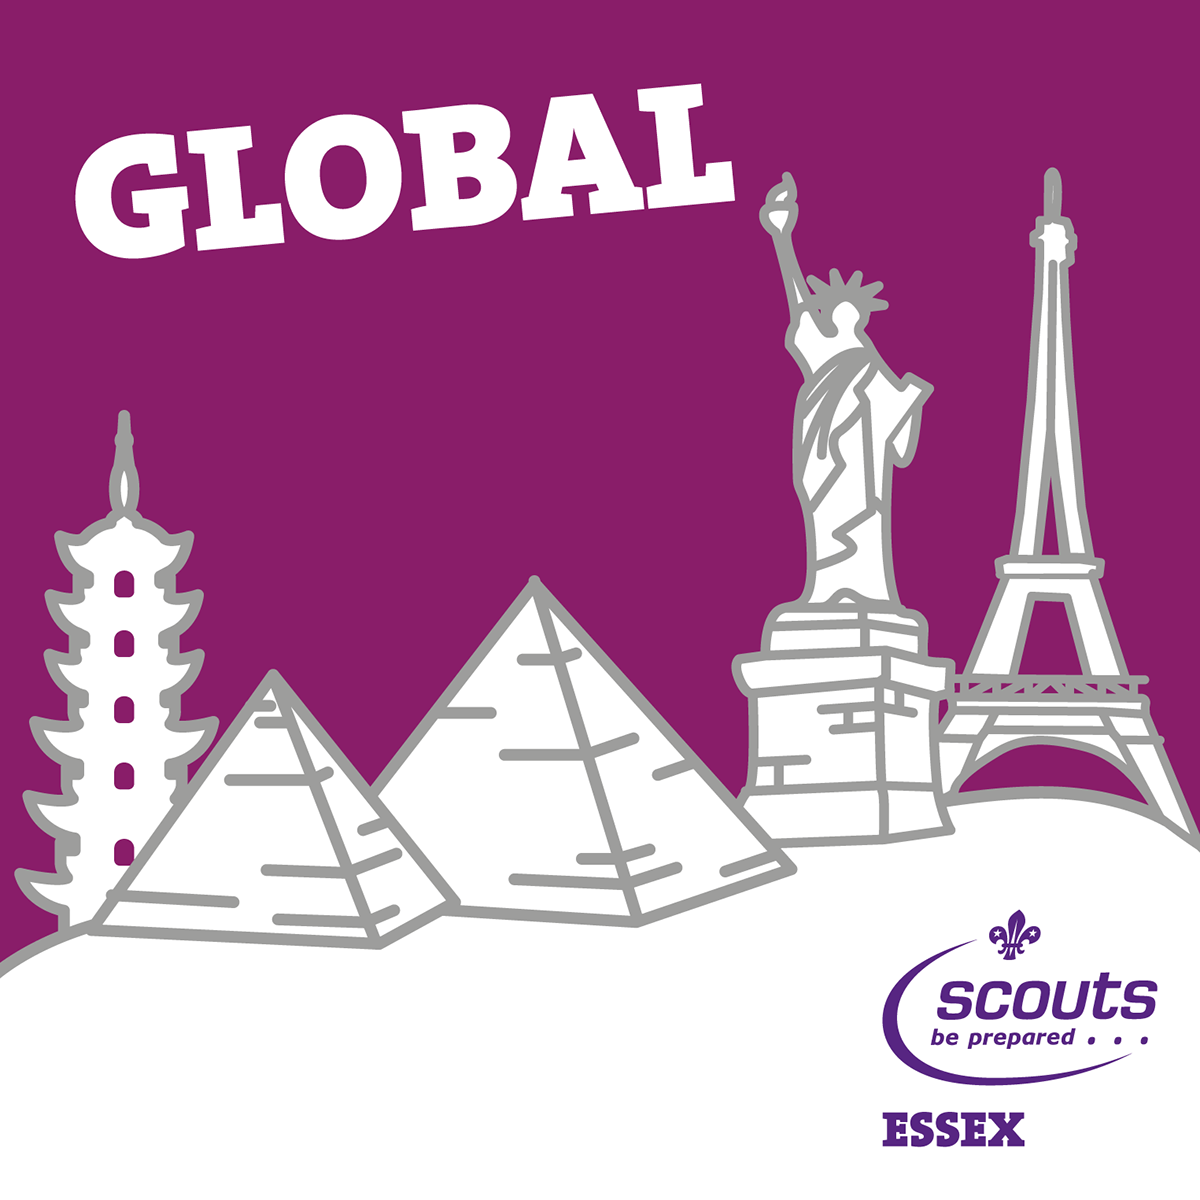 scouts scouting iScout Essex Plus essex